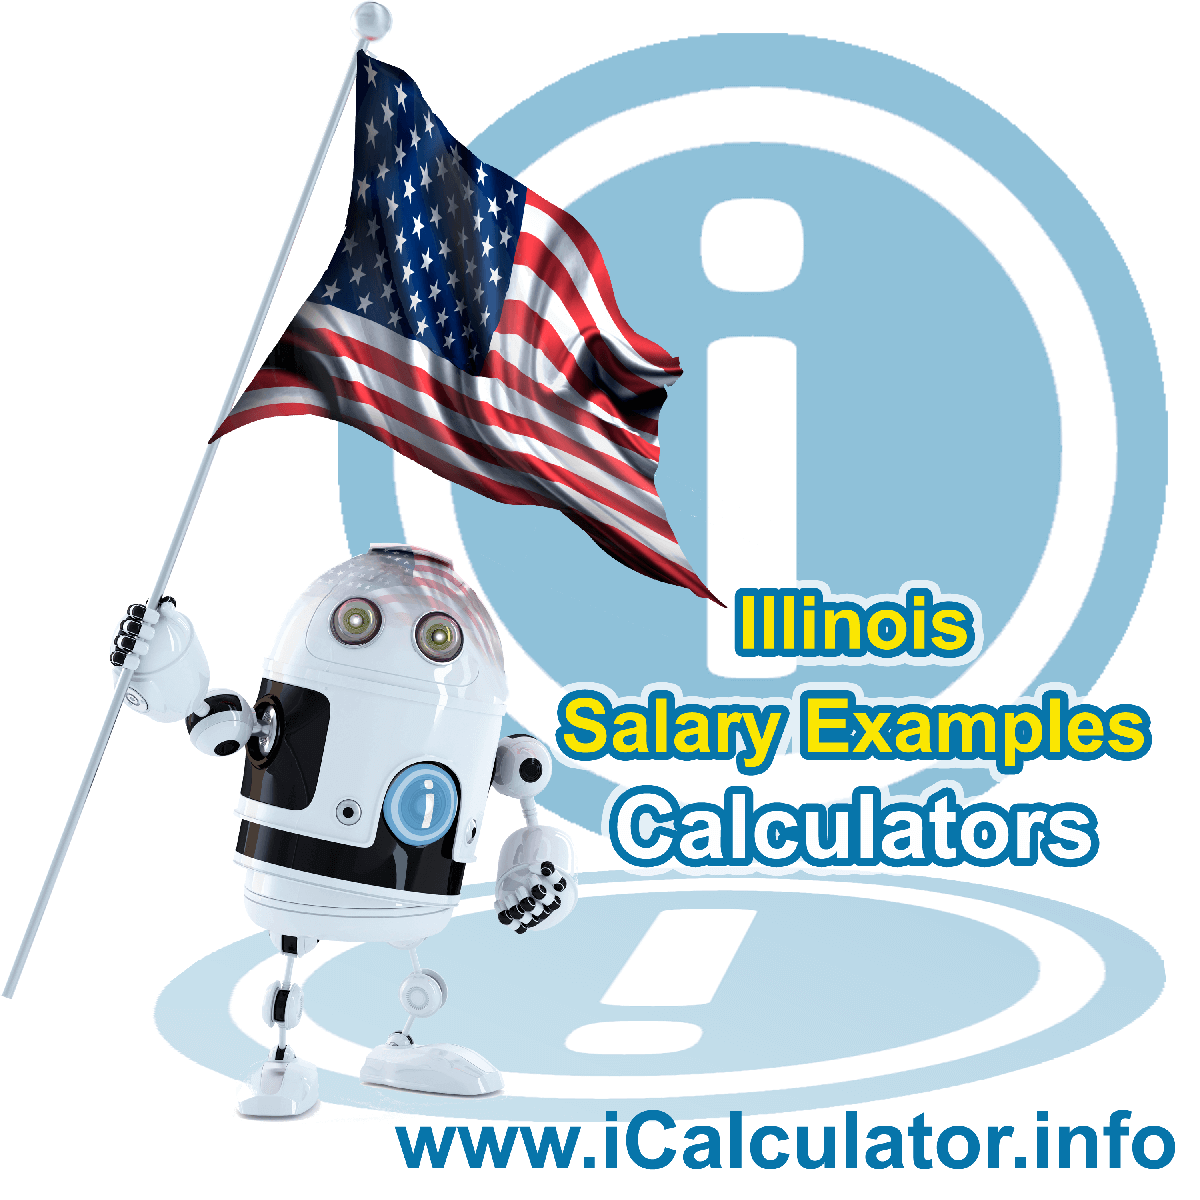 Illinois Salary Example for $ 270,000.00 in 2023 | iCalculator™ | $ 270,000.00 salary example for employee and employer paying Illinois State tincome taxes. Detailed salary after tax calculation including Illinois State Tax, Federal State Tax, Medicare Deductions, Social Security, Capital Gains and other income tax and salary deductions complete with supporting Illinois state tax tables 